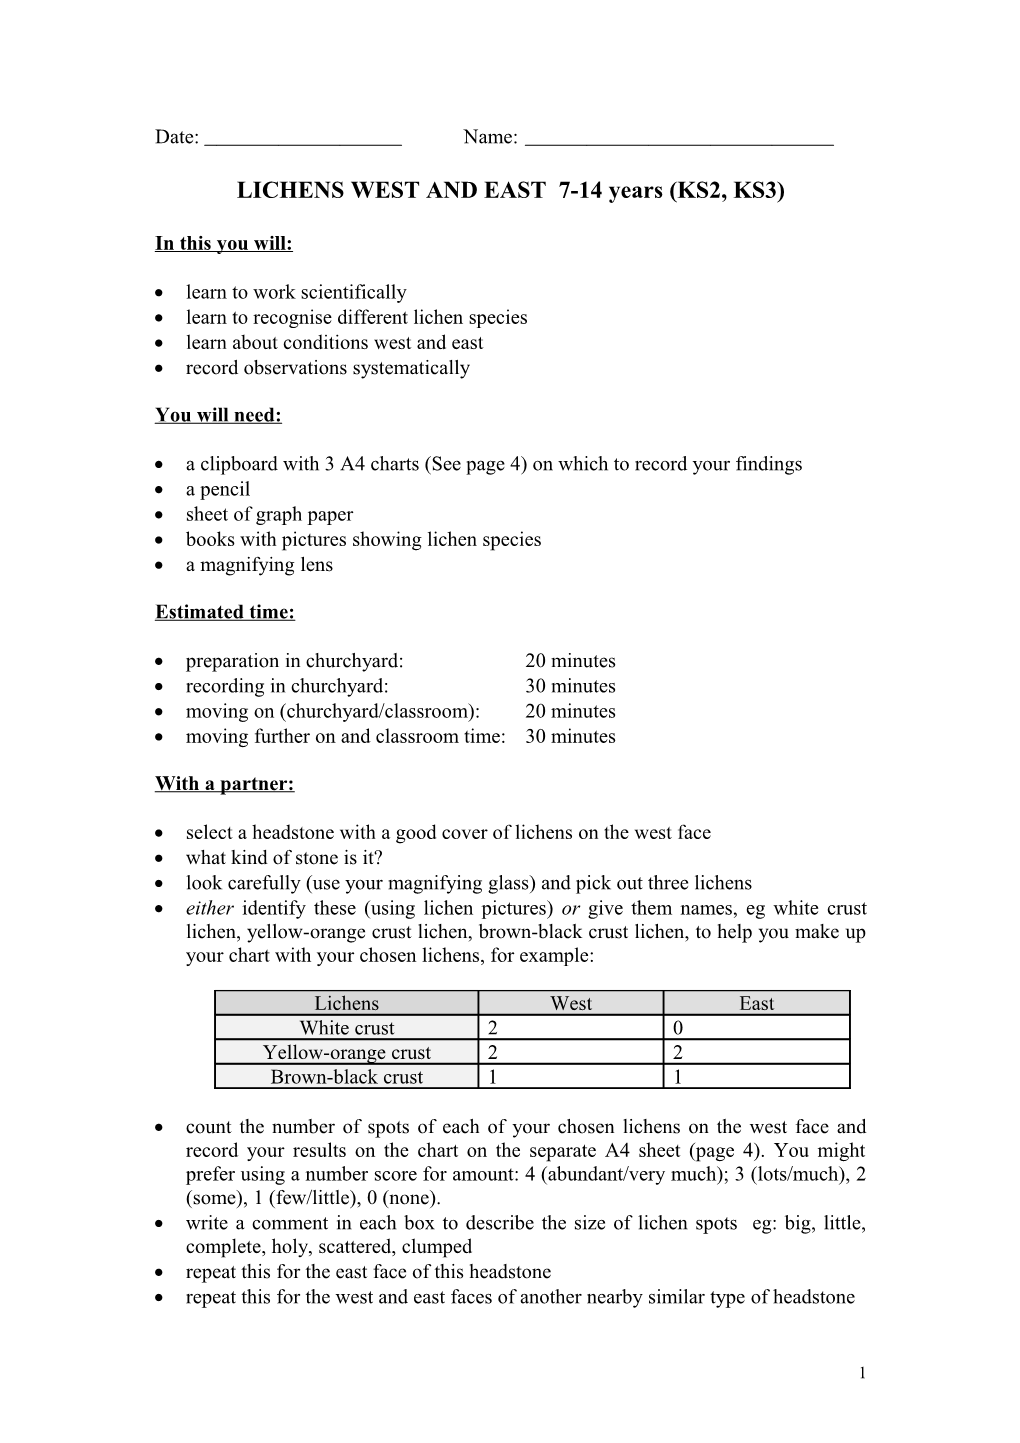 LICHENS WEST and EAST 7-14 Years (KS2, KS3)